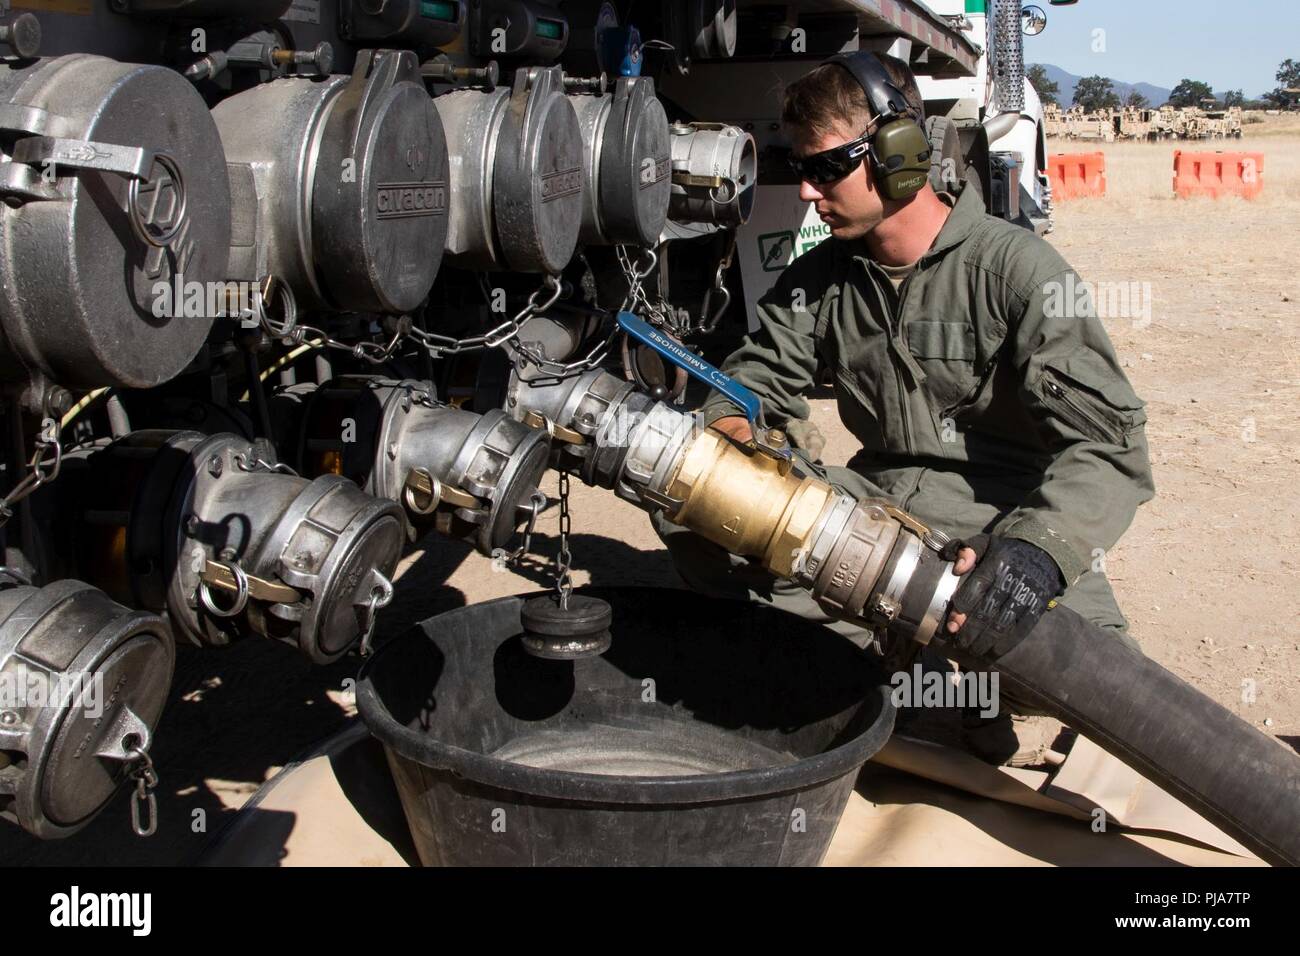 Army Reserve Spc. Joseph K. Reinhard, a petroleum specialist with the 900th Quartermaster Company based in El Paso, Texas, monitors the flow of  JP-8 jet fuel as 14,000 gallons of fuel is pumped from a tanker into a 20,000 gallon collapsible tank at a refueling point, July 5, 2018 at Fort Hunter Liggett, California. The 900th QM is at Fort Hunter Liggett for a training mission in support of Combat Support Training Exercise  (CSTX) 91-18-01, an exercise conducted by the Army Reserve’s 91st Training Division. (Arizona Army National Guard Stock Photo